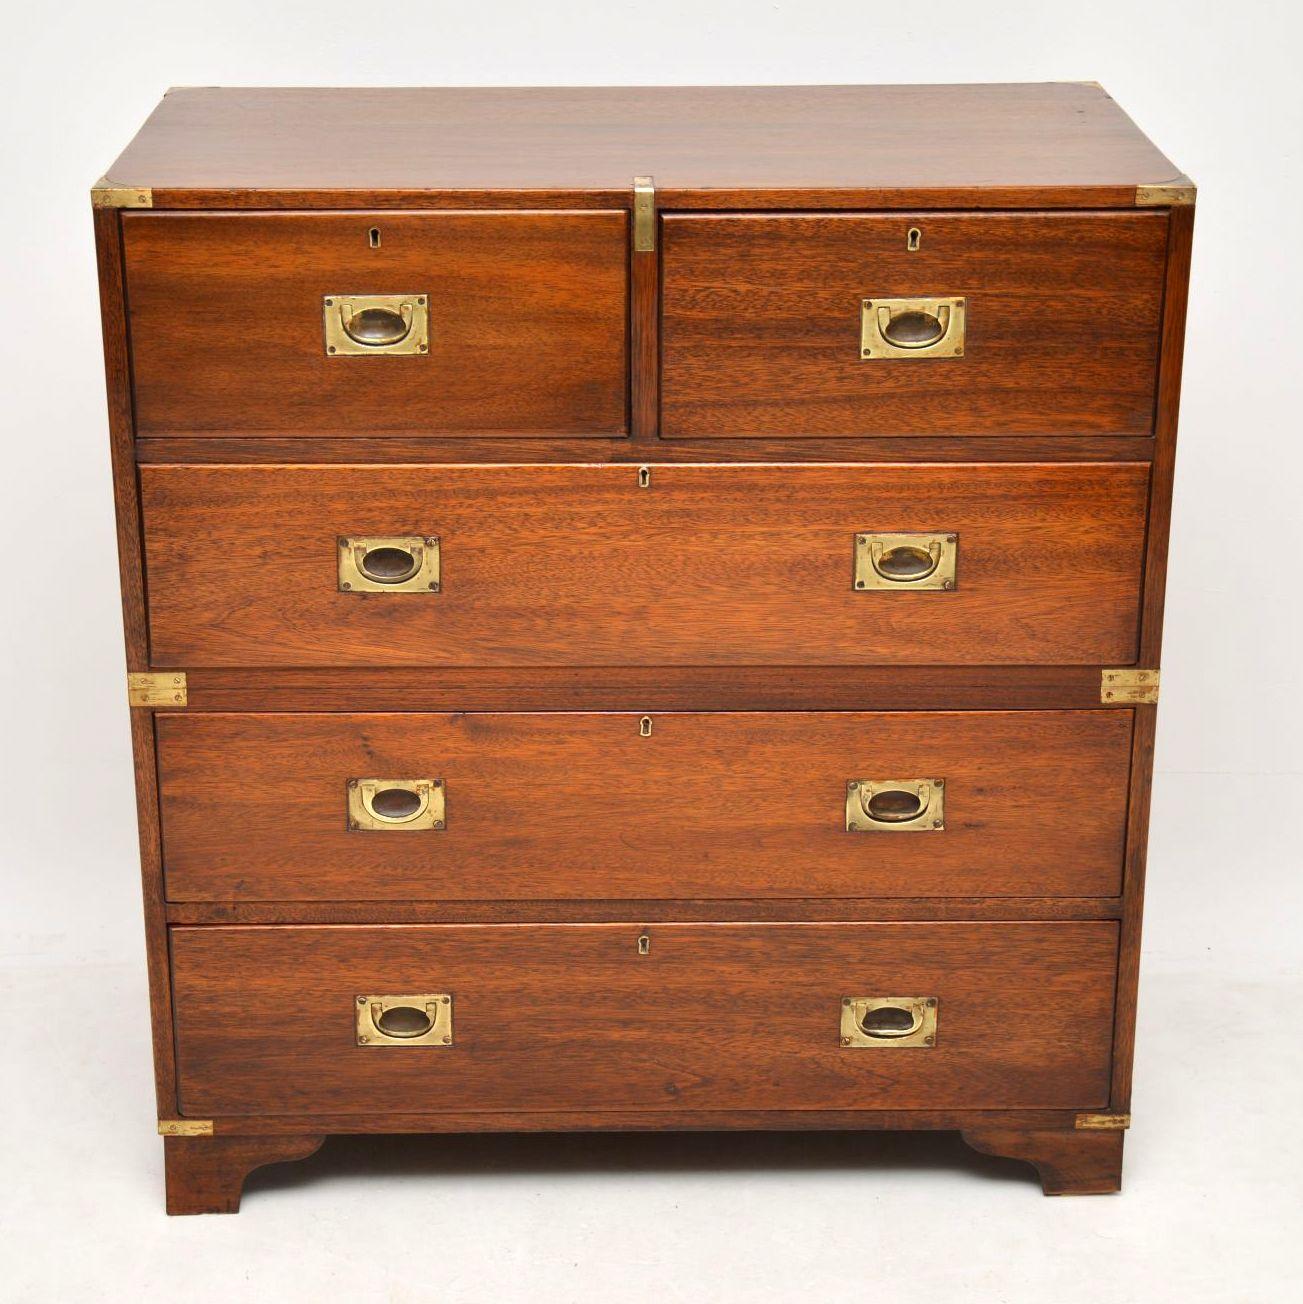 Antique mahogany campaign chest of drawers dating to circa 1930s period and in good condition. This chest gives the appearance of being in two sections, but it is indeed in one piece. It has the classic brass corner fittings and sits on bracket